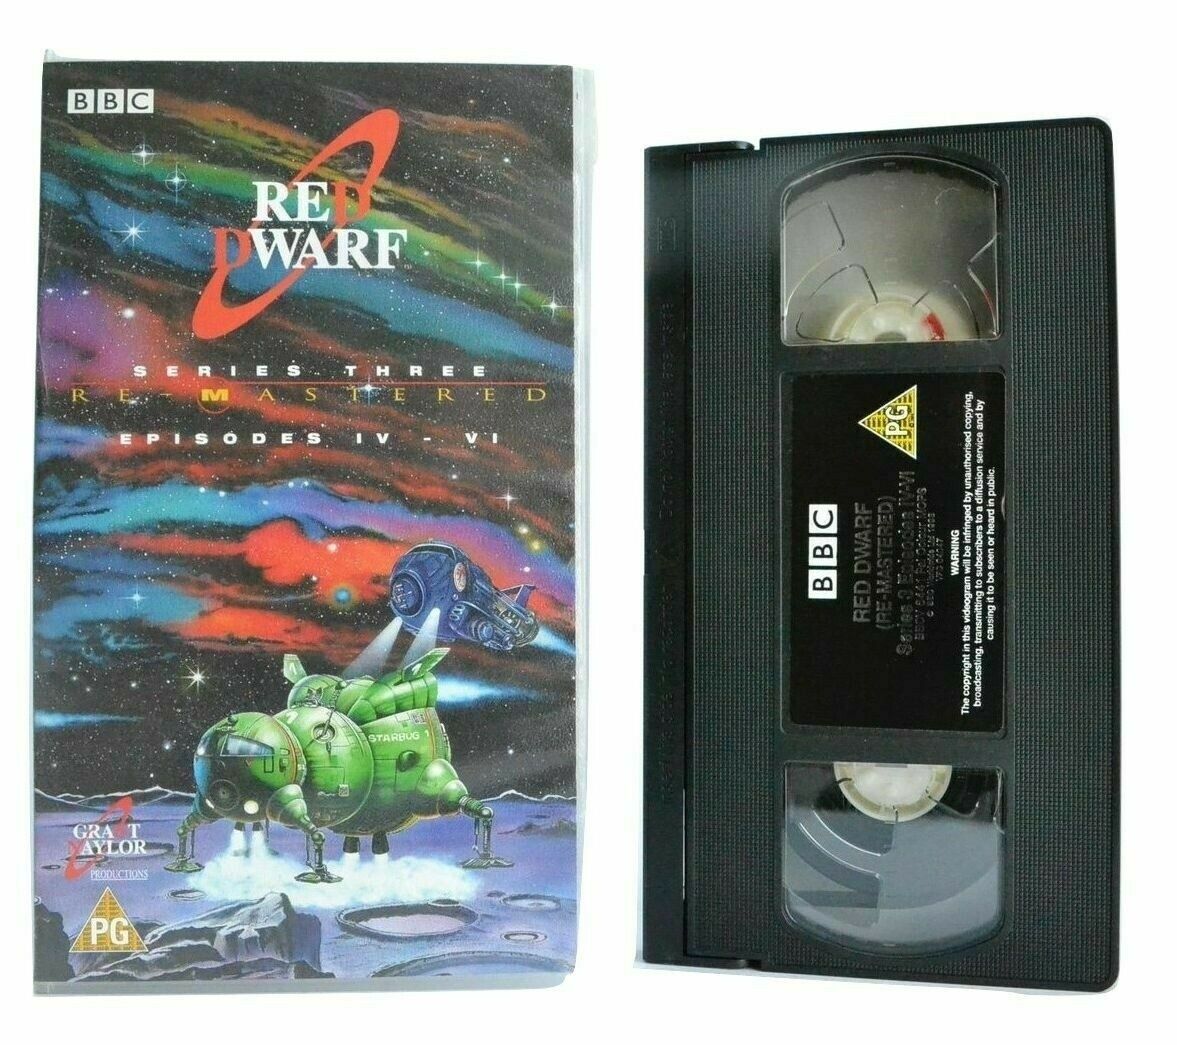 Red Dwarf: Series 3/Episodes 4-6 - Remastered - Sci-Fi Comedy Franchise - VHS-